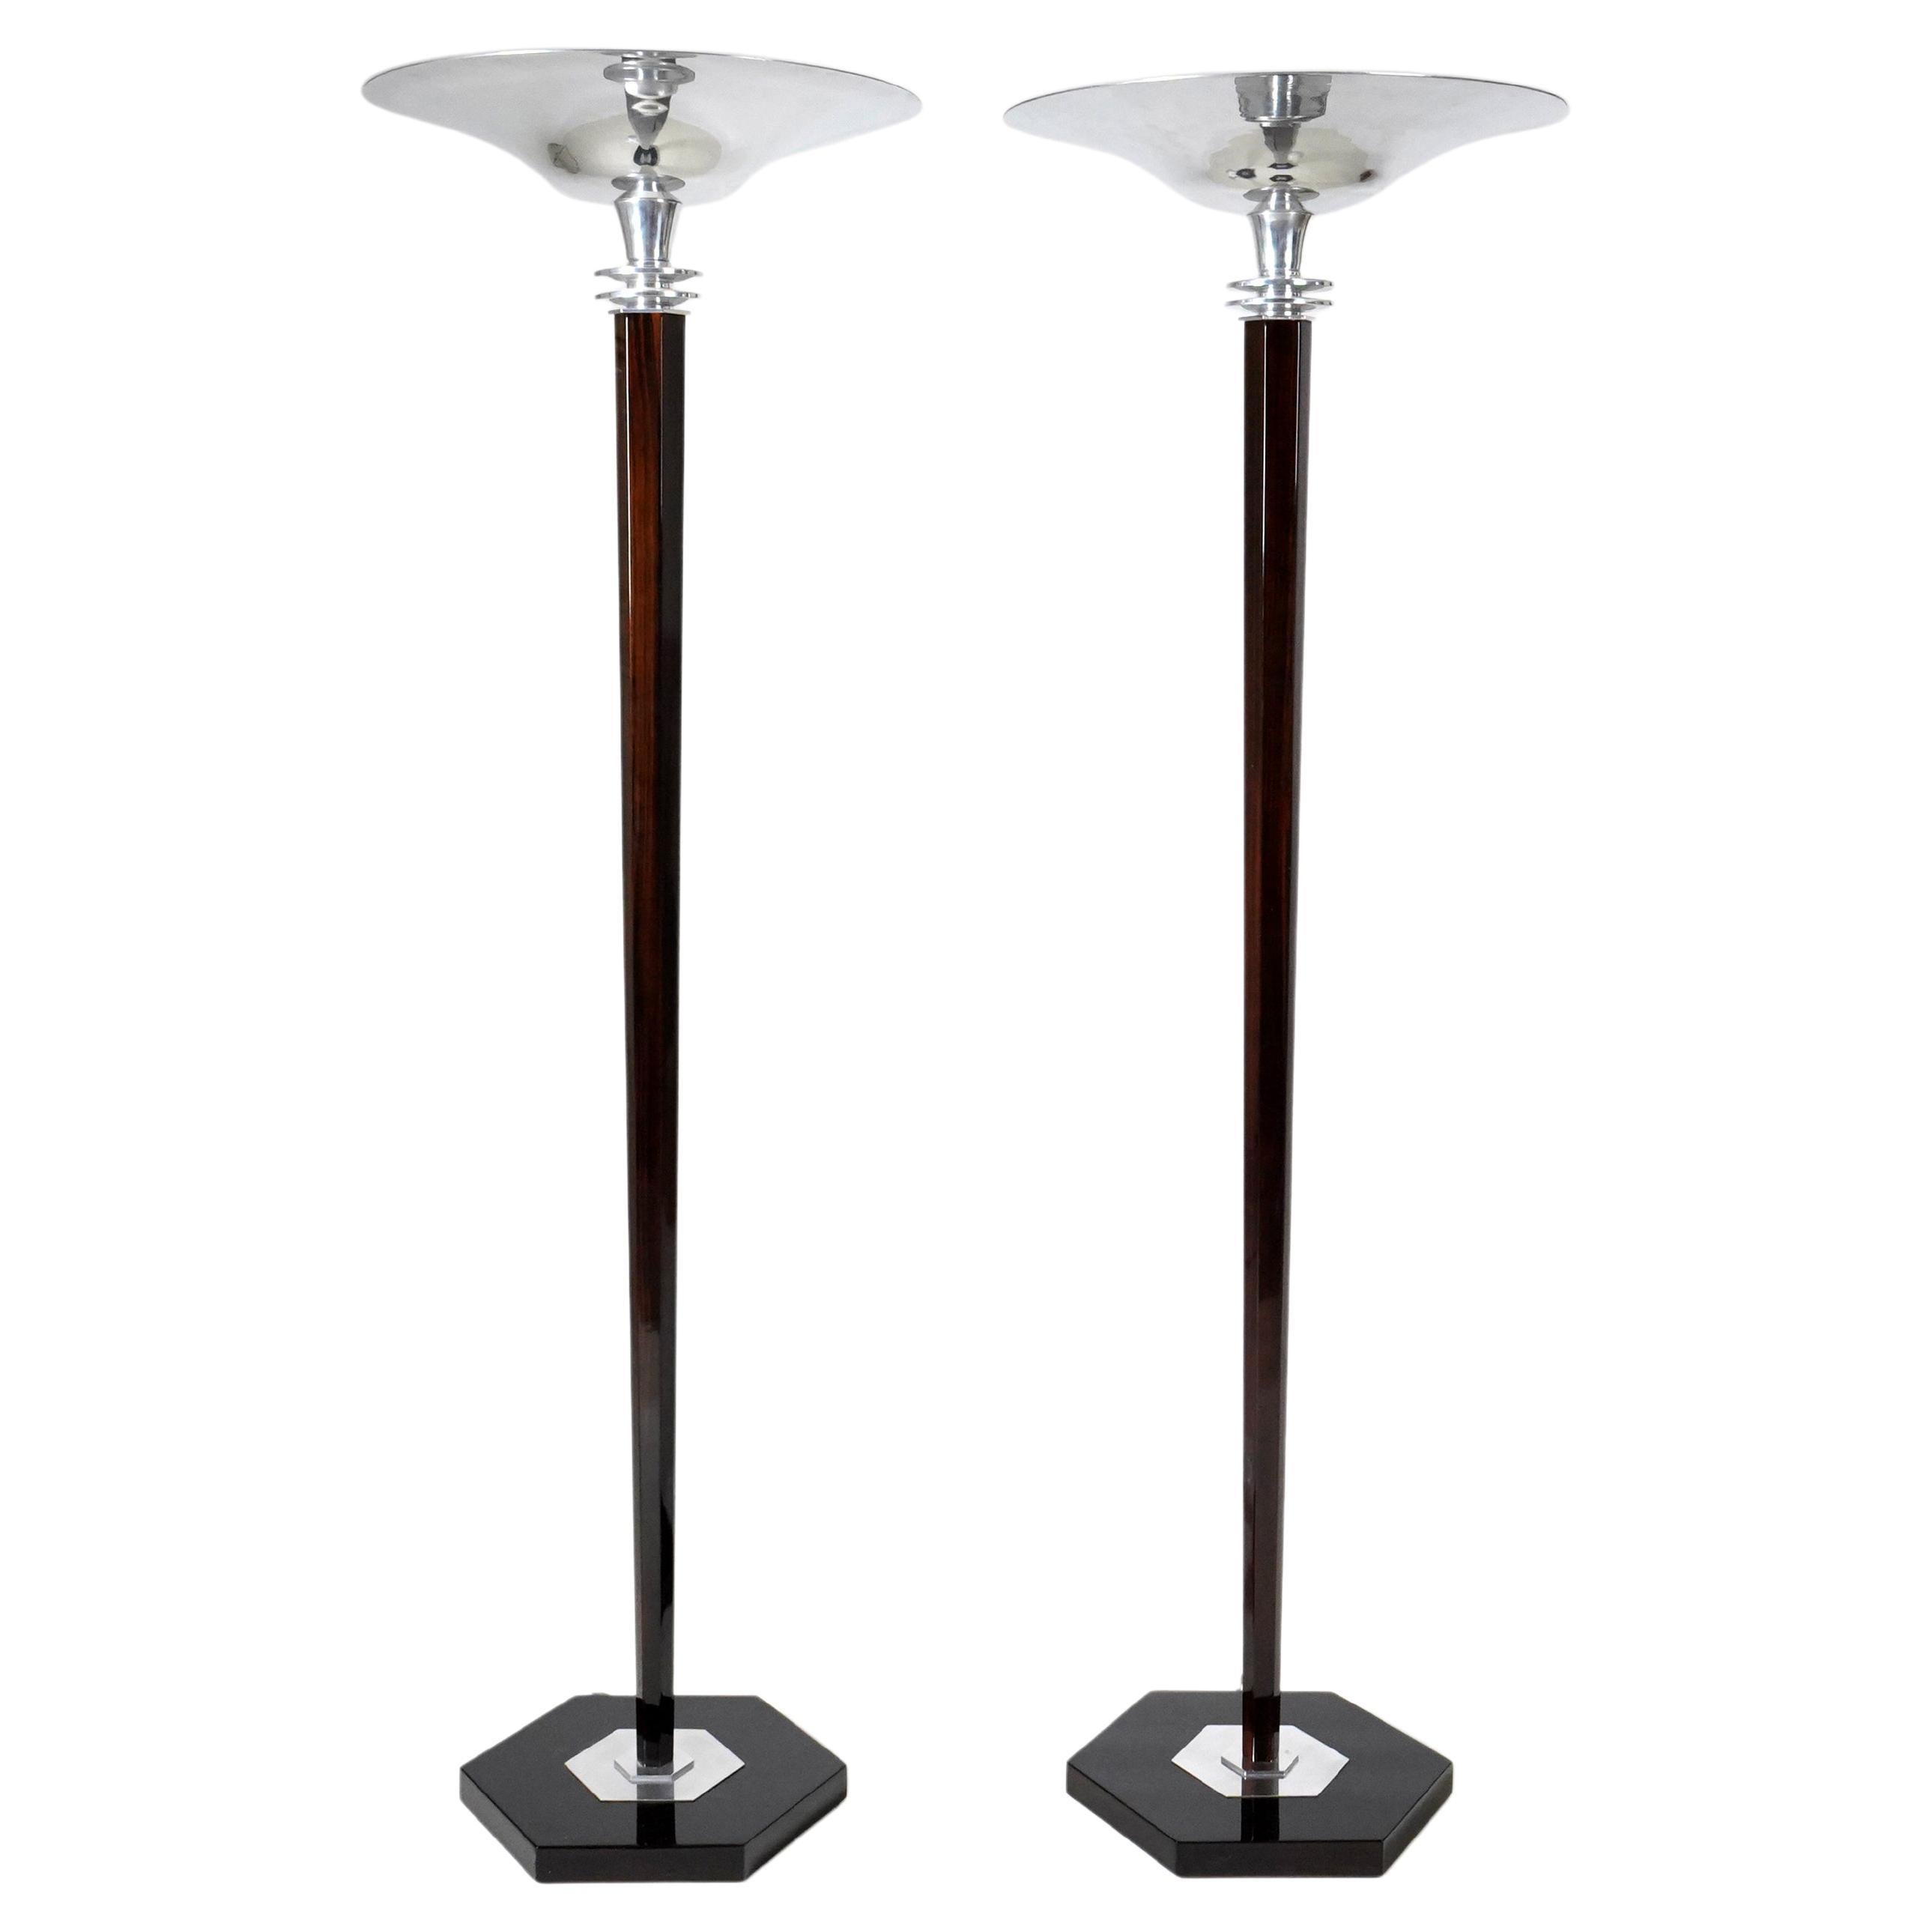 Pair of Art Deco Torchiers in Walnut and Nickel